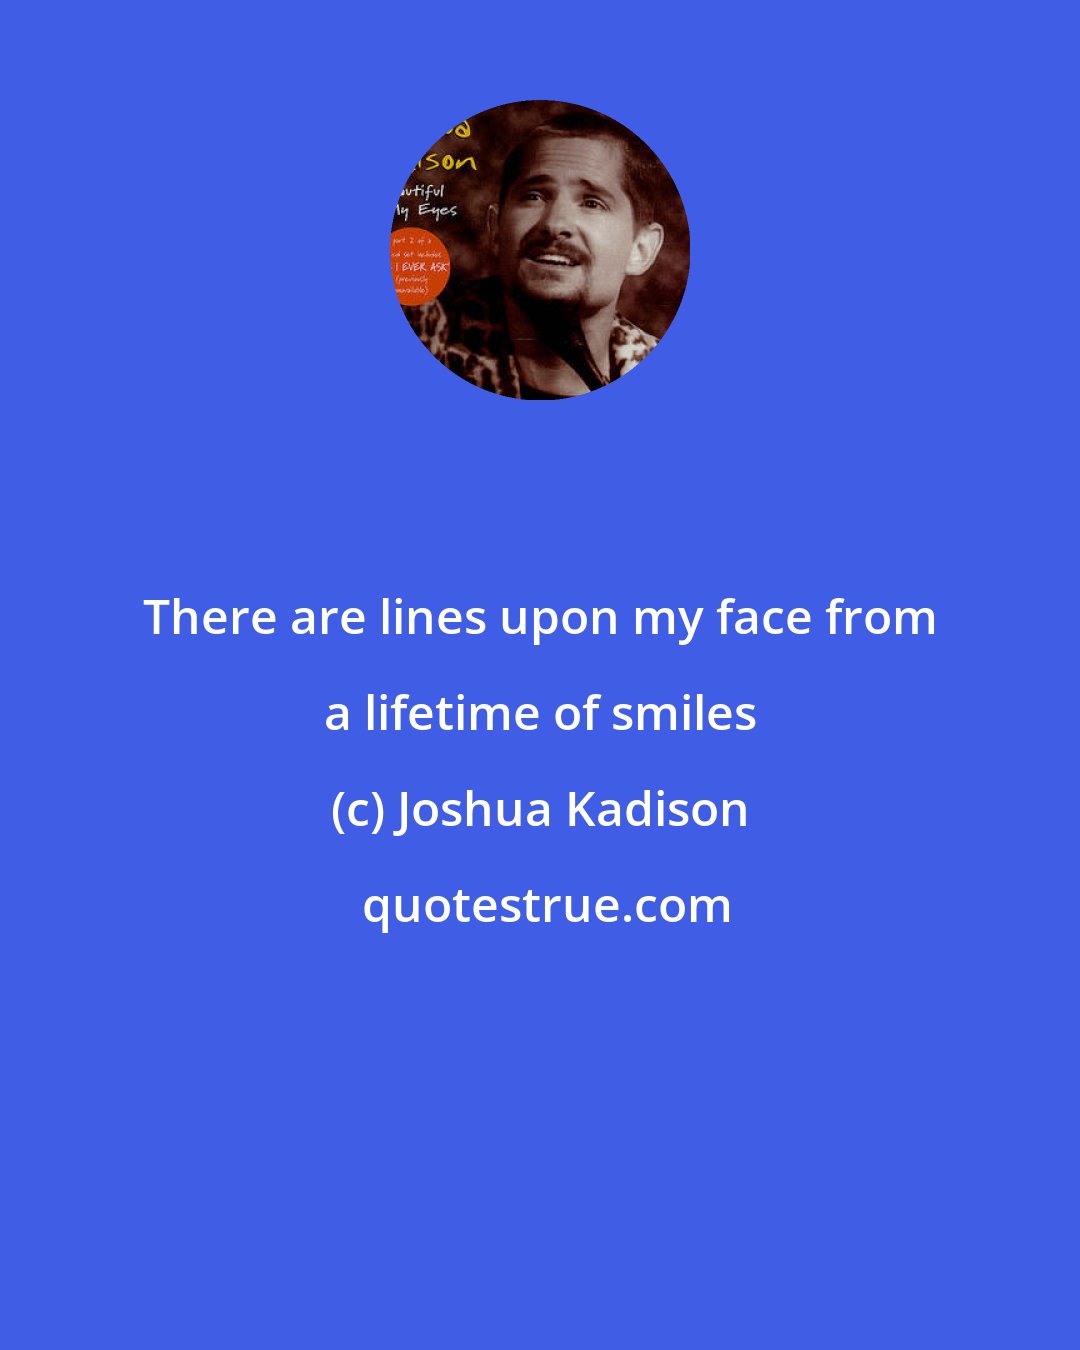 Joshua Kadison: There are lines upon my face from a lifetime of smiles